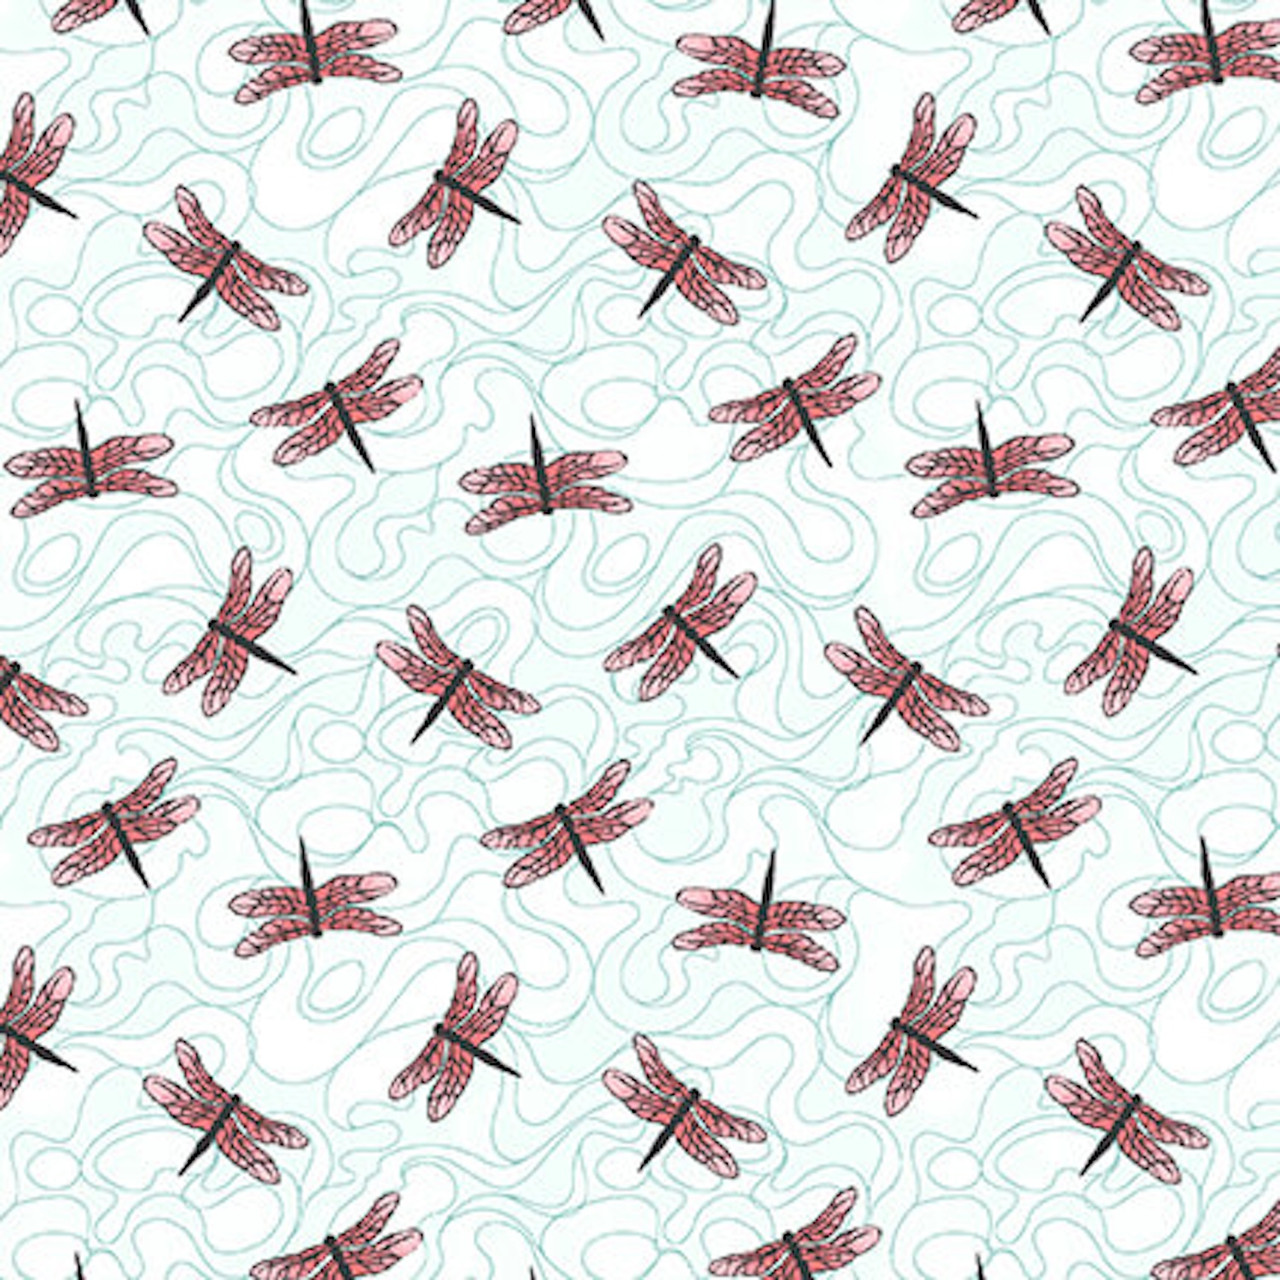 Studio E Koi Garden Tossed Small Dragonflies Multi Fabric By The Yard